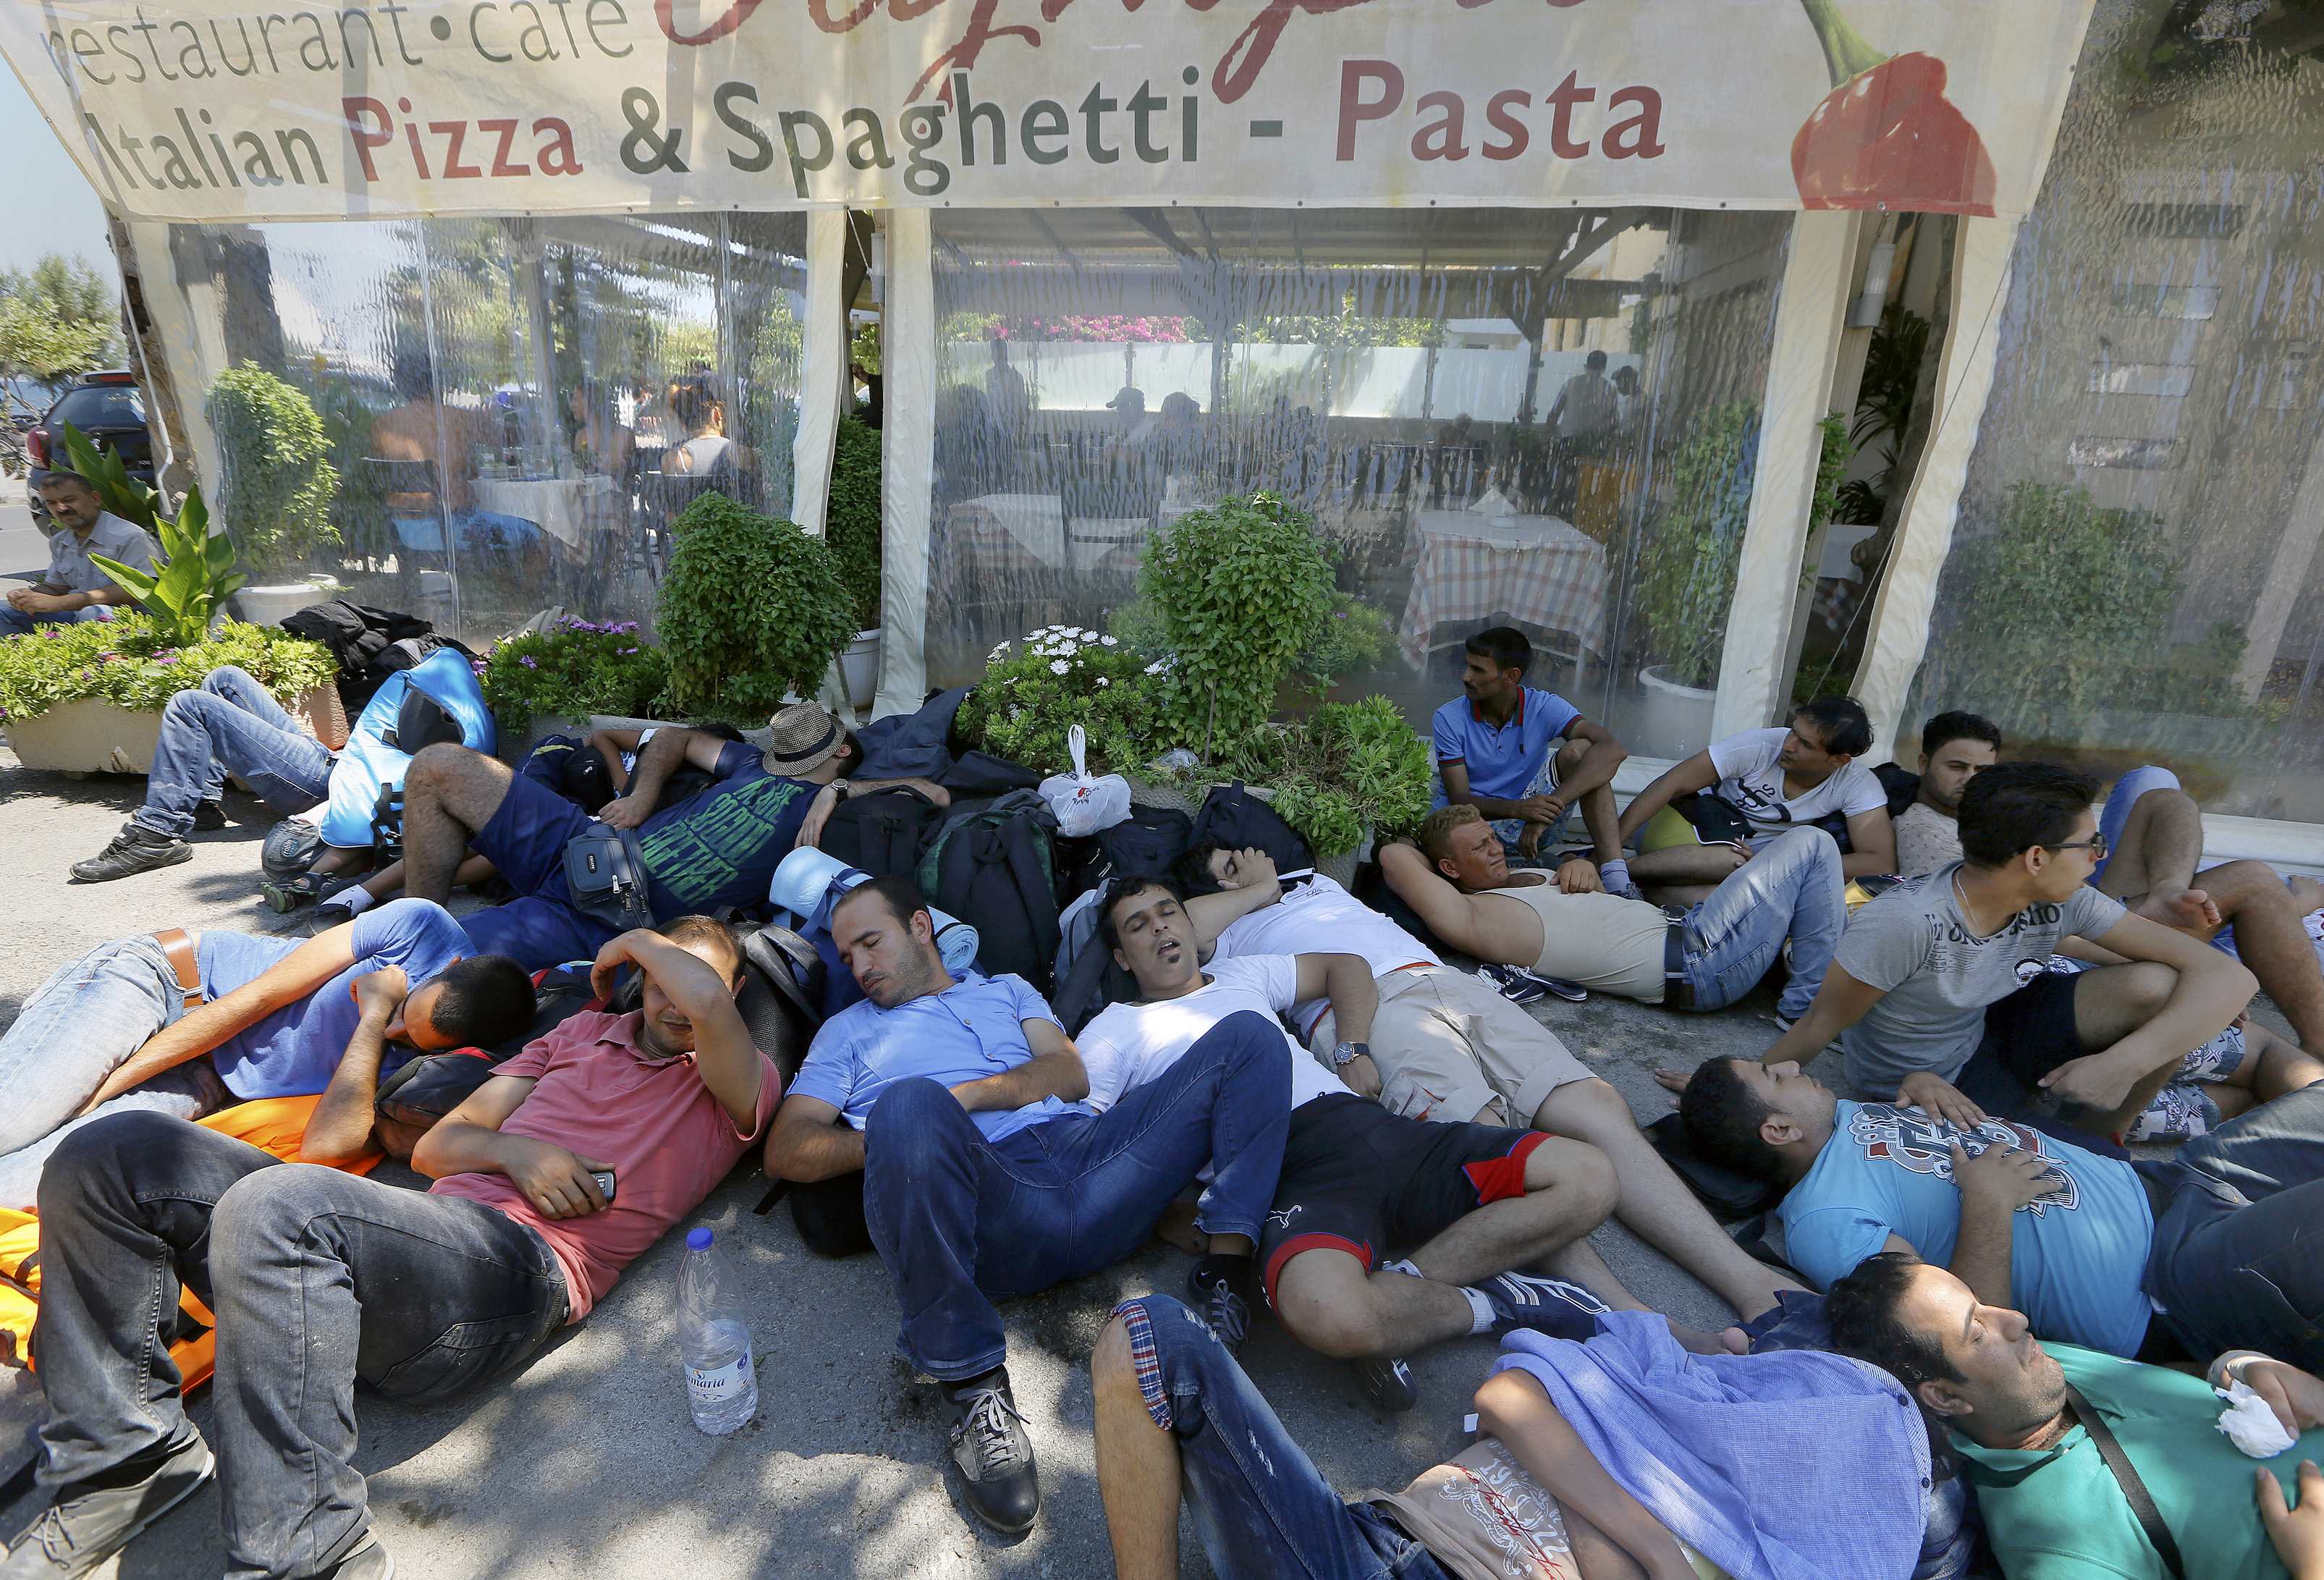 Syrian refugees rest on a street as they are wait for registration outside the stadium in the Greek island of Kos August 13, 2015. The United Nations refugee agency (UNHCR) called on Greece to take control of the 